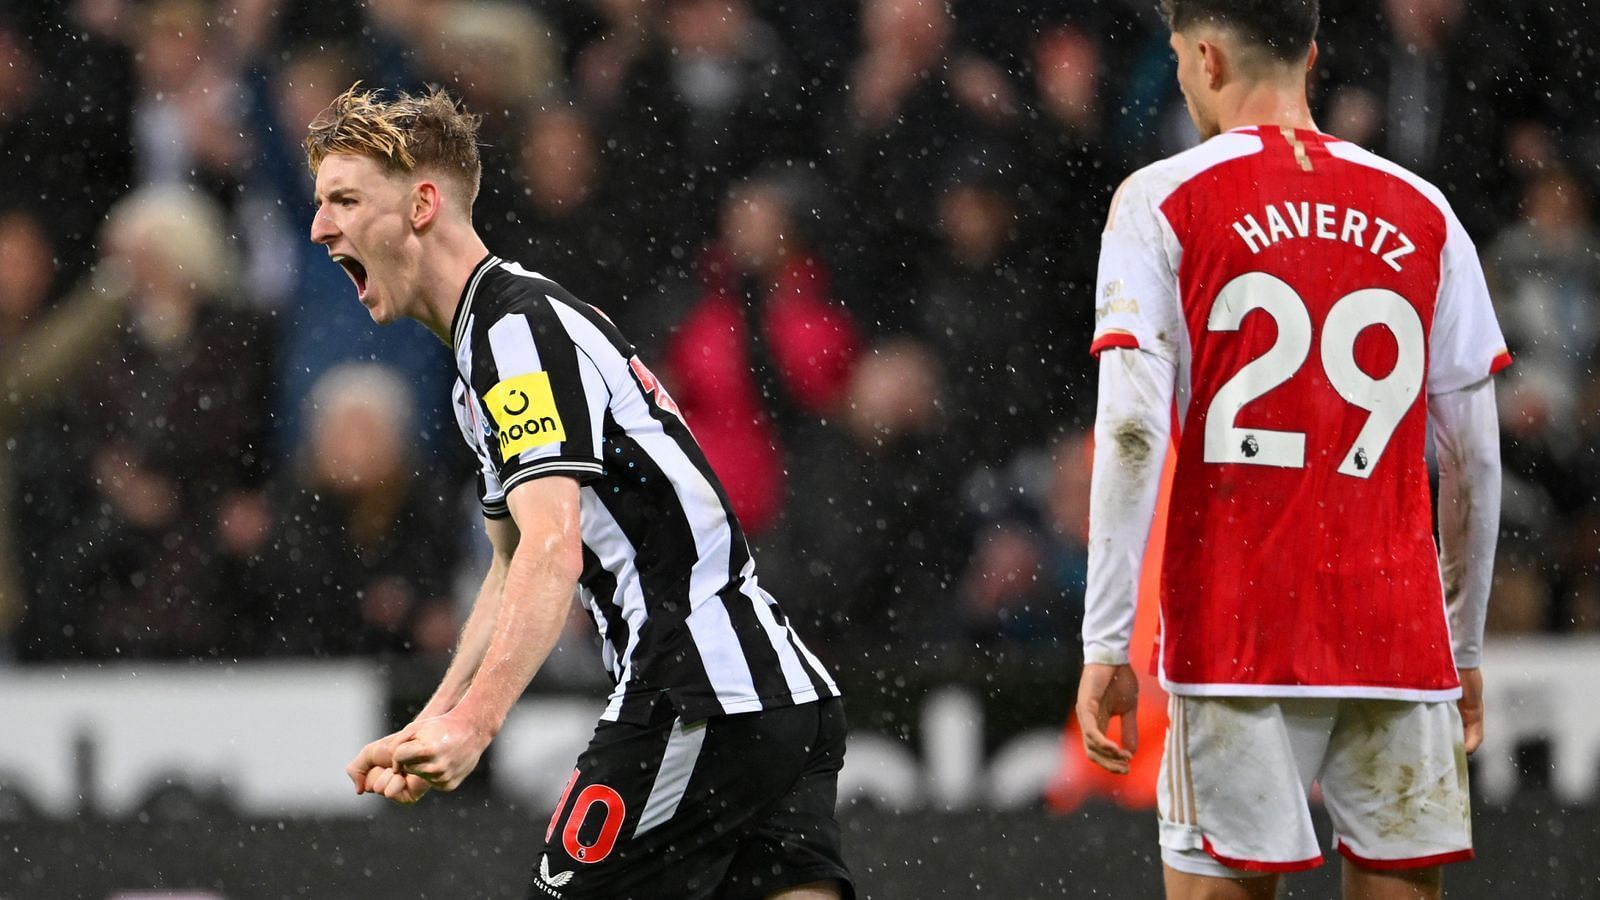 Newcastle defeated Arsenal 1-0 in the Premier League.